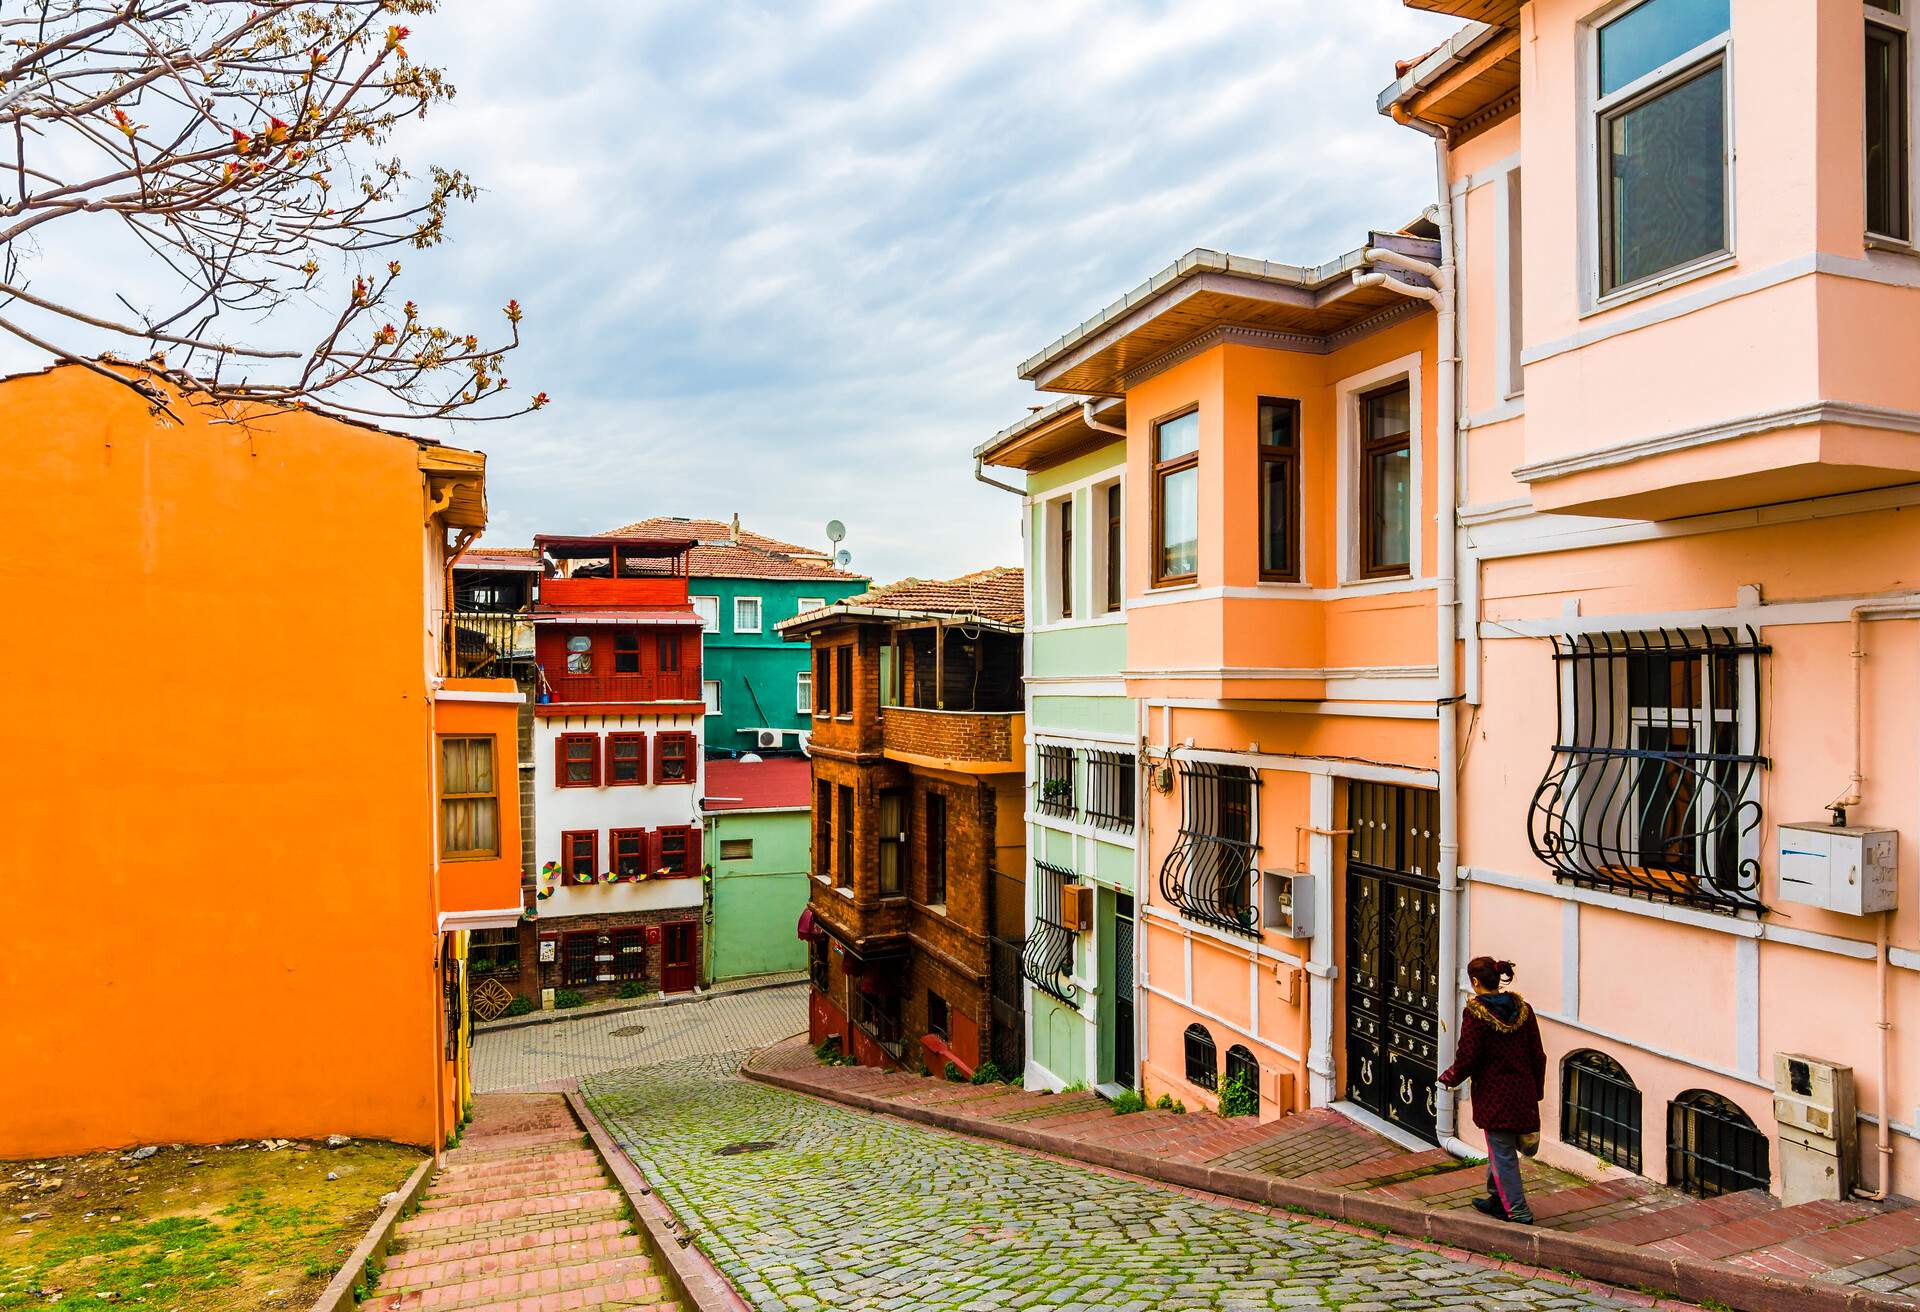 dest_turkey_balat_istanbul_coloured-houses_shutterstock_1266537910_universal_within-usage-period_80507